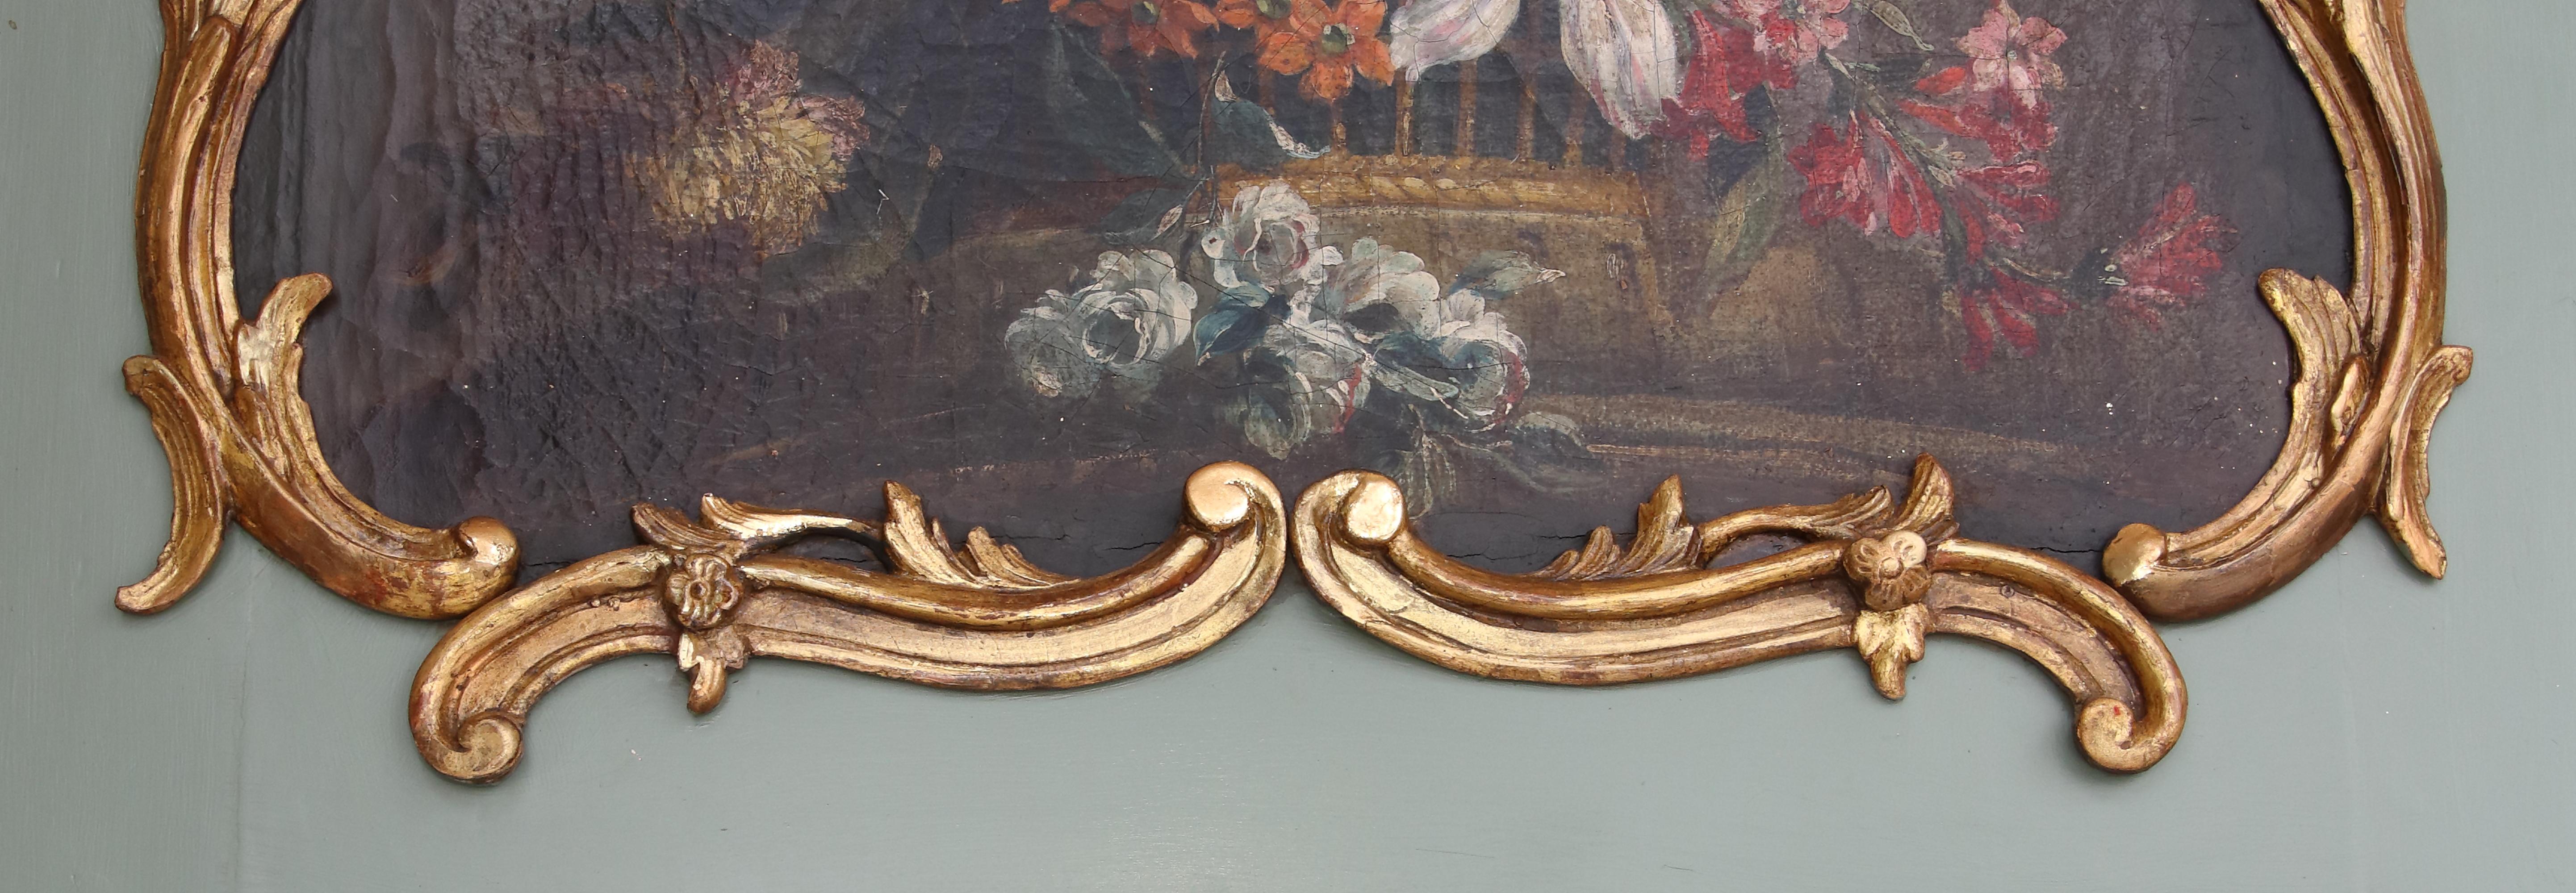 18th Century French Louis XV Period Flower Still Life Trumeau Wall Mirror For Sale 3